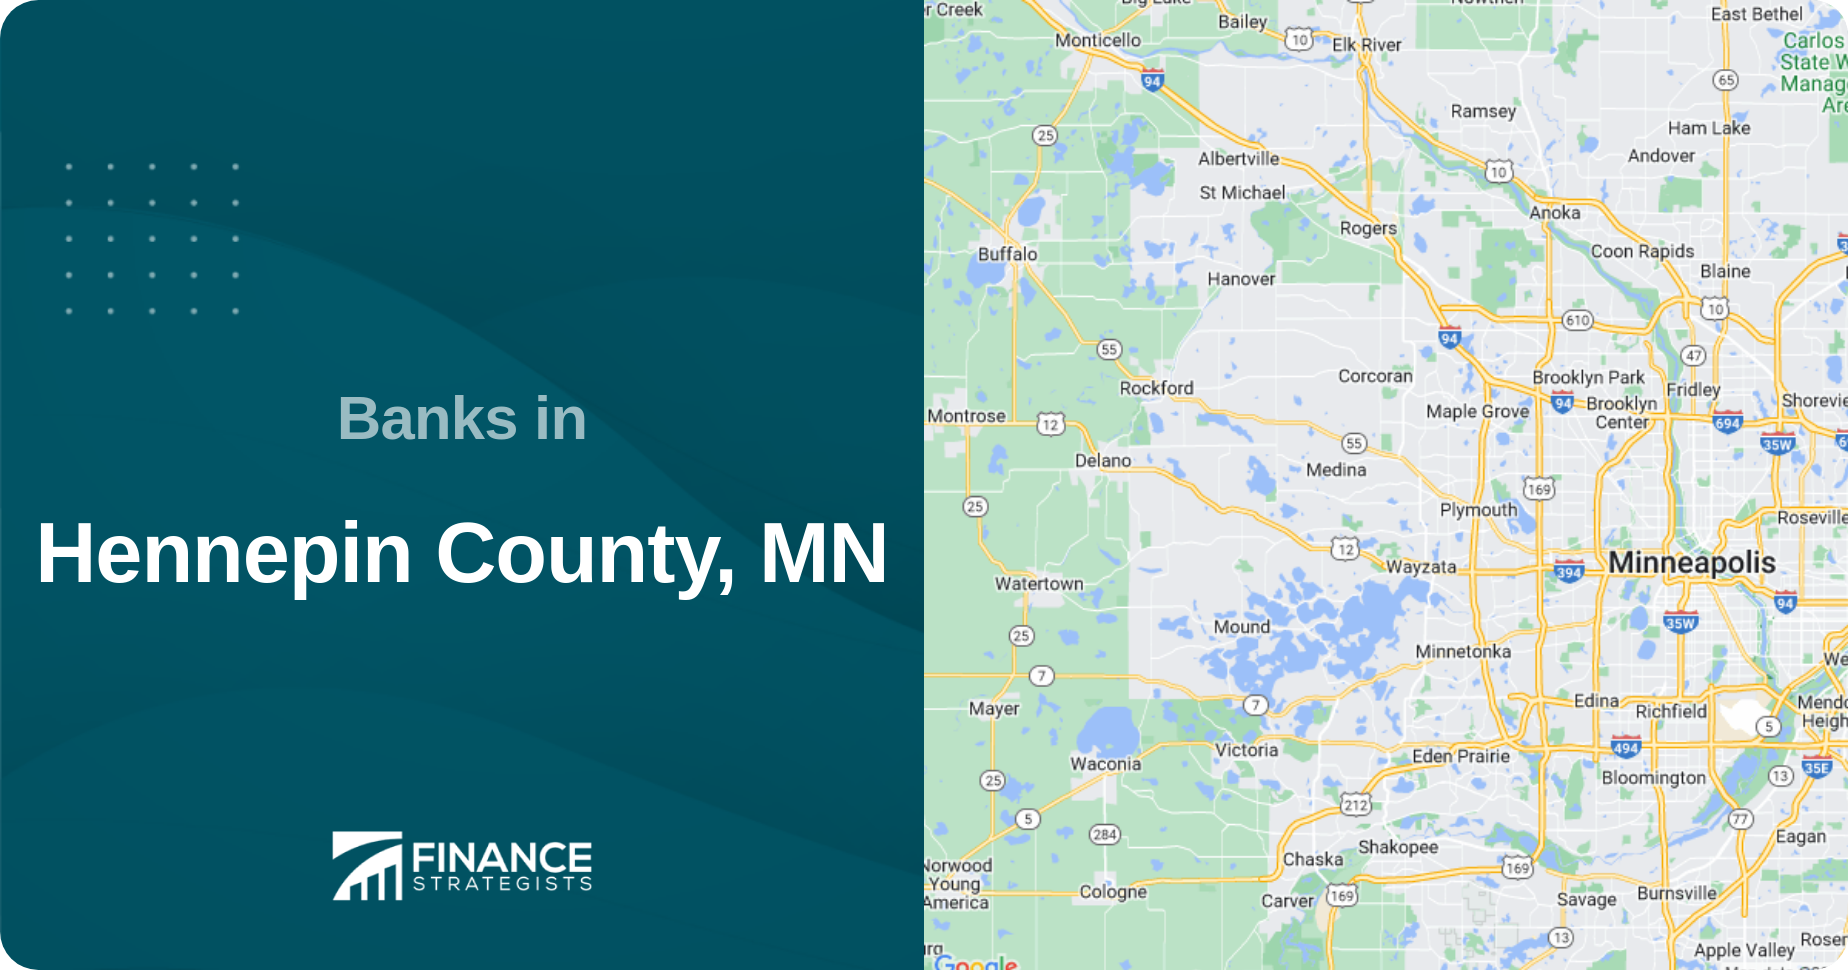 Banks in Hennepin County, MN